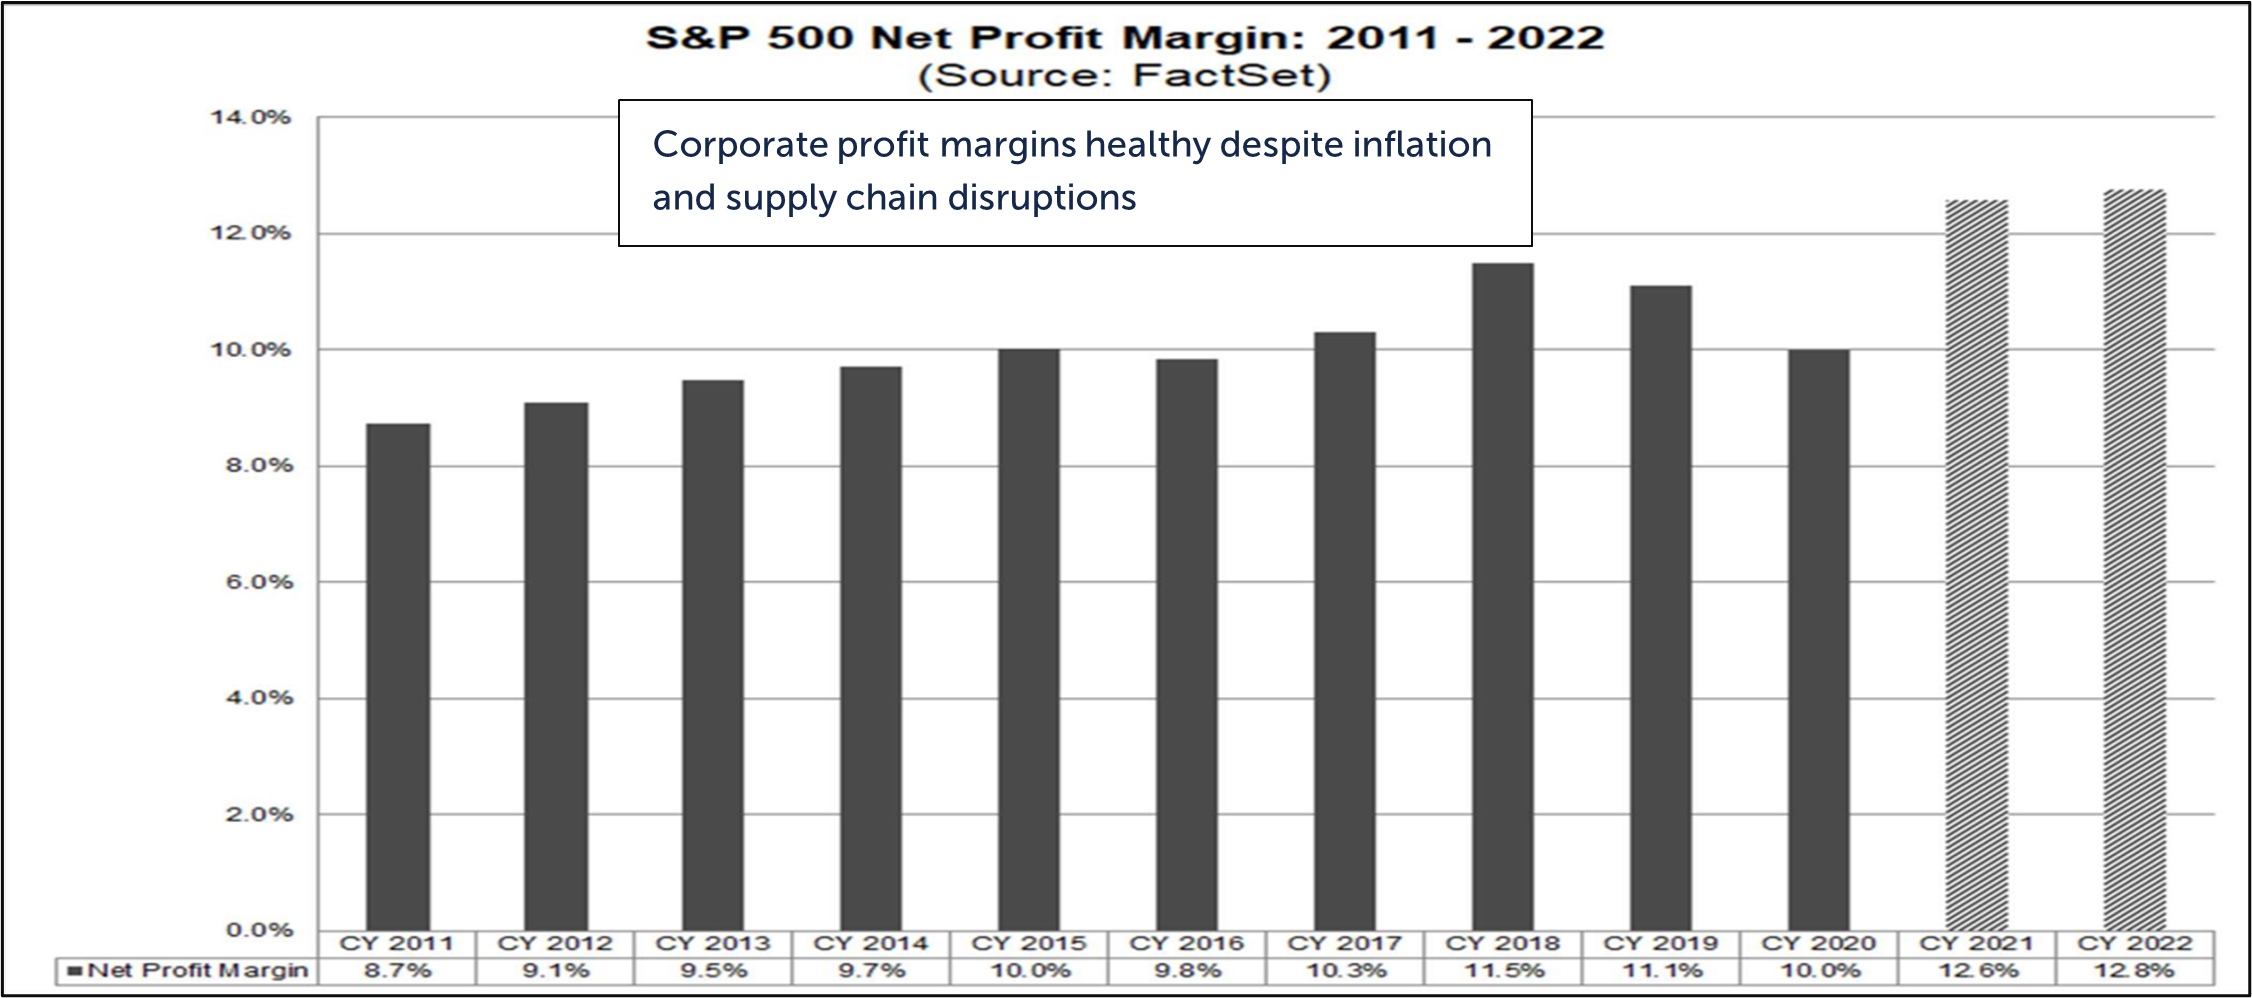 Bar graph depicting S&P 500 Net Profit Margin from 2011 to 2022 with text reading: Corporate profit margins healthy despite inflation and supply chain disruptions